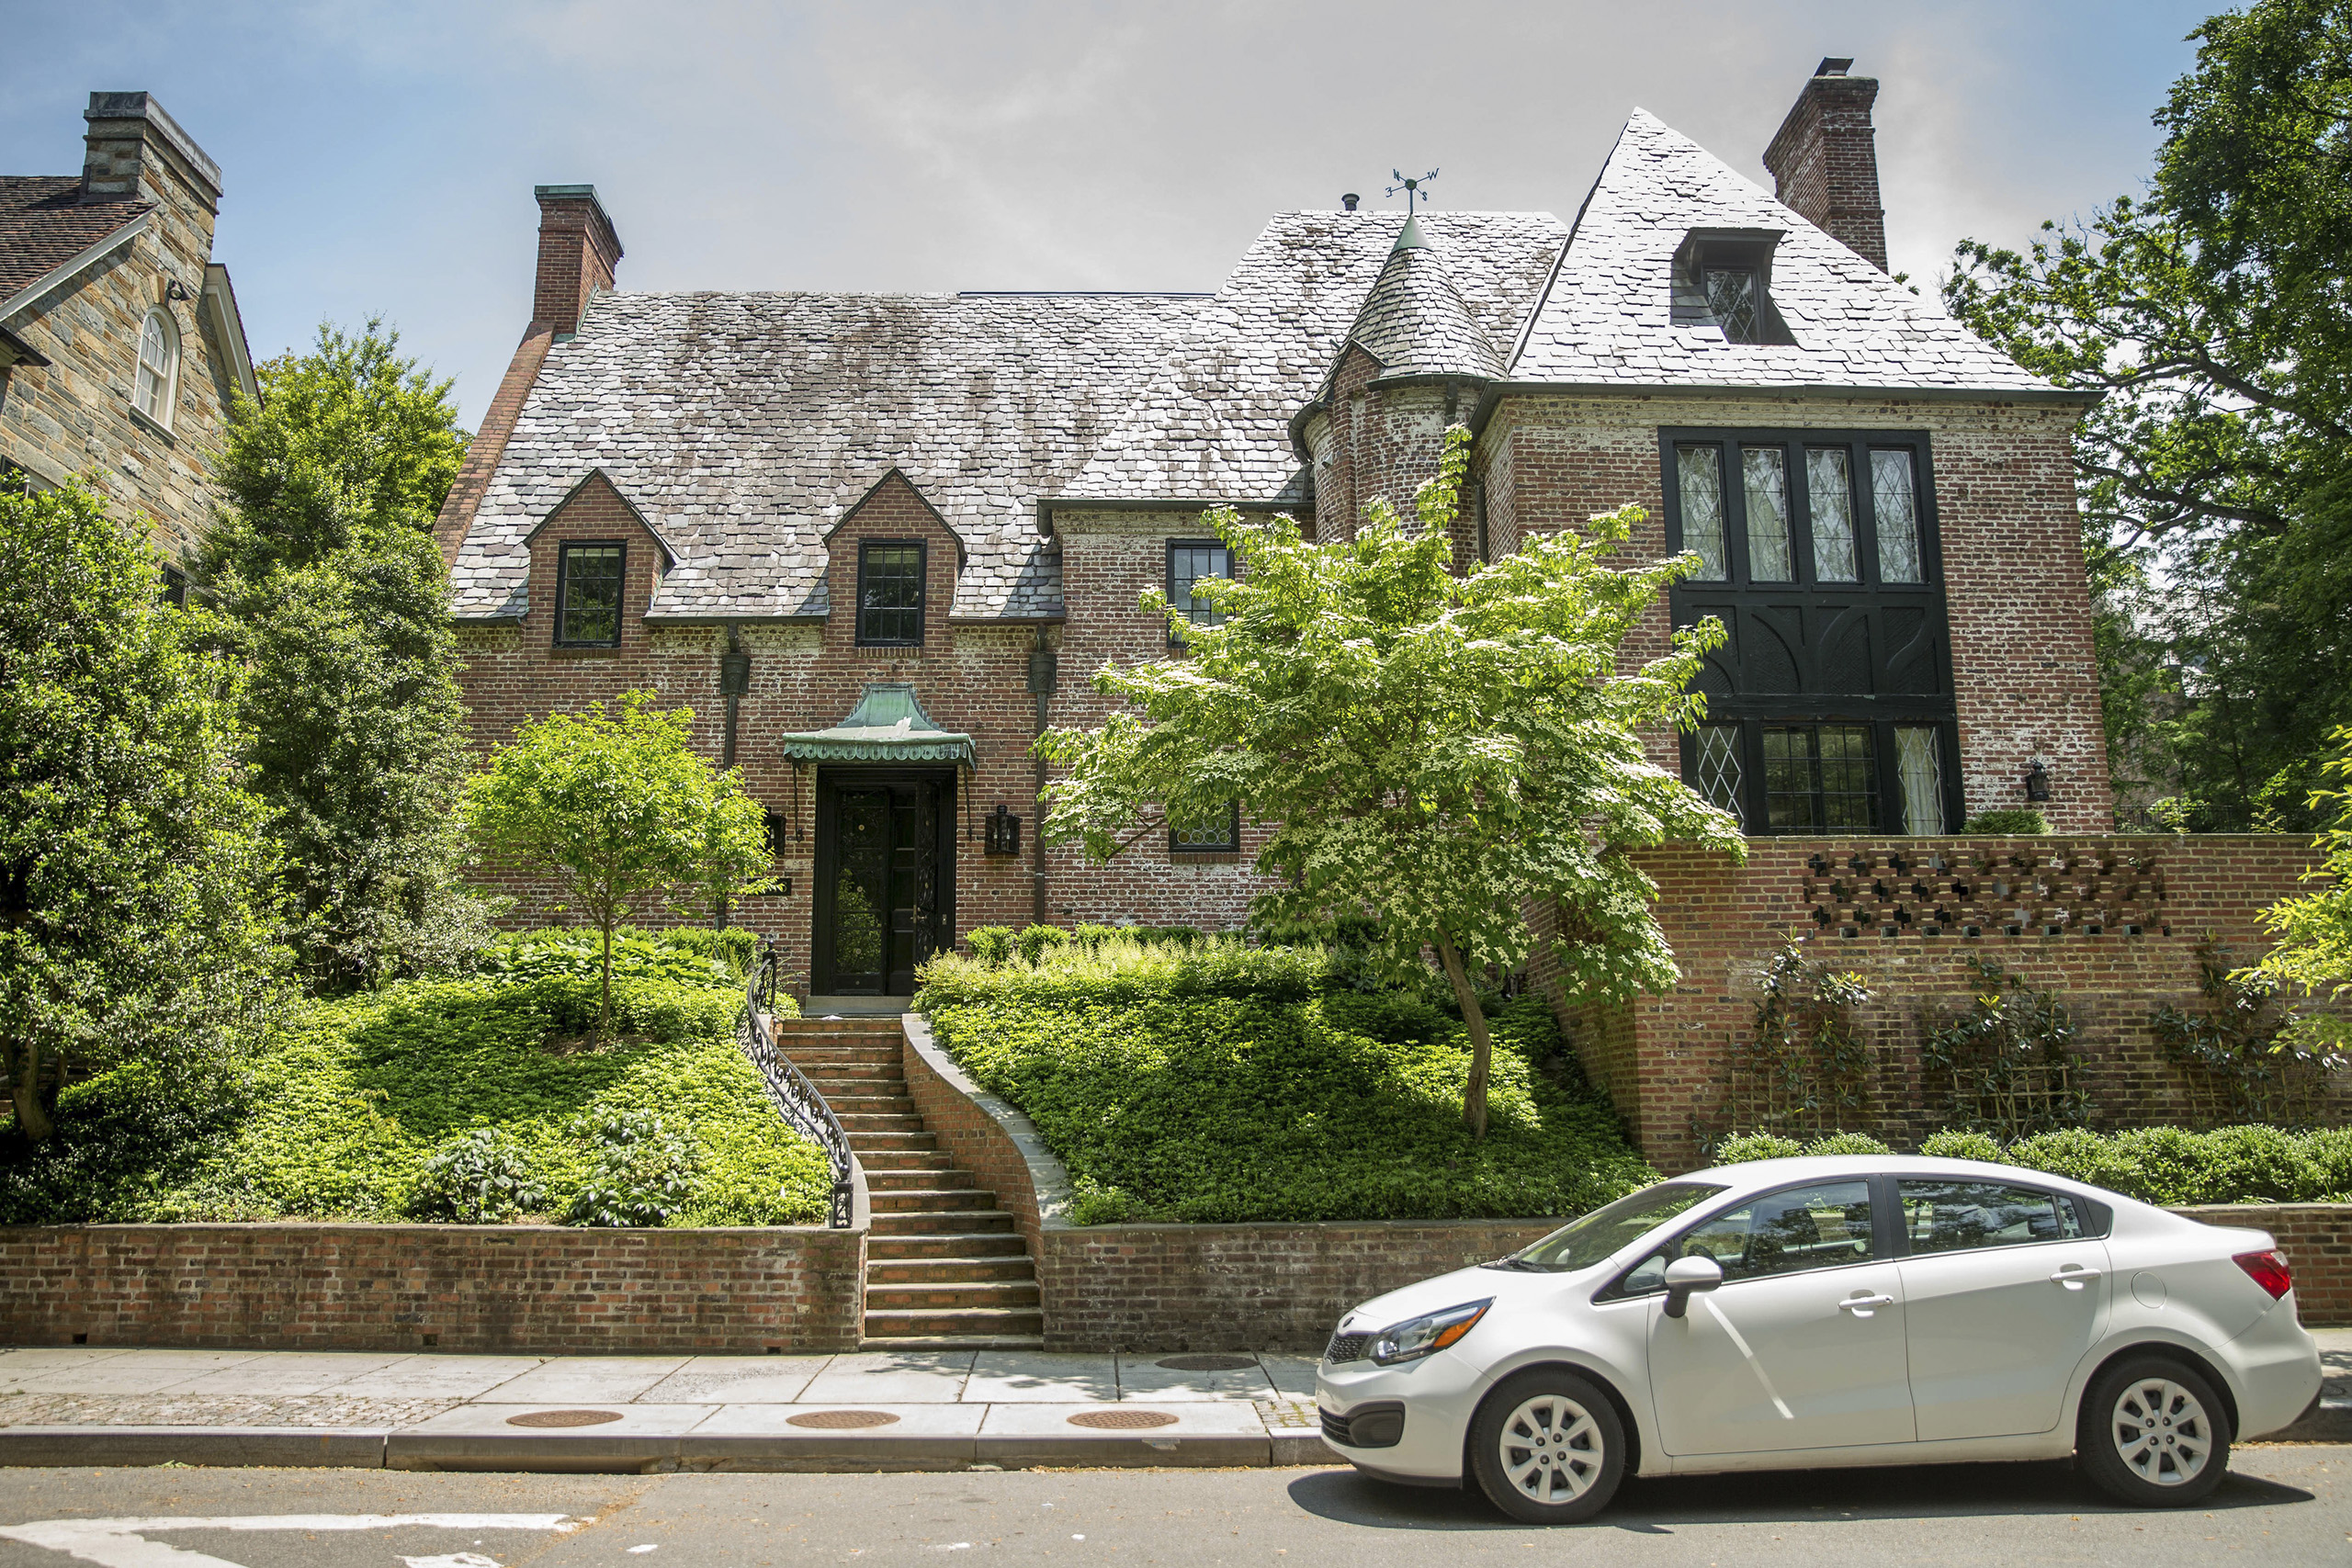 Real estate circles buzzed Wednesday over reports that President Obama and first lady Michelle Obama have decided to lease this nine-bedroom mansion in Washington's Kalorama neighborhood when he leaves office in January 2017. The home sits on a quarter-acre lot just down the road from the Naval Observatory, the vice president's official residence. (Andrew Harnik—AP)